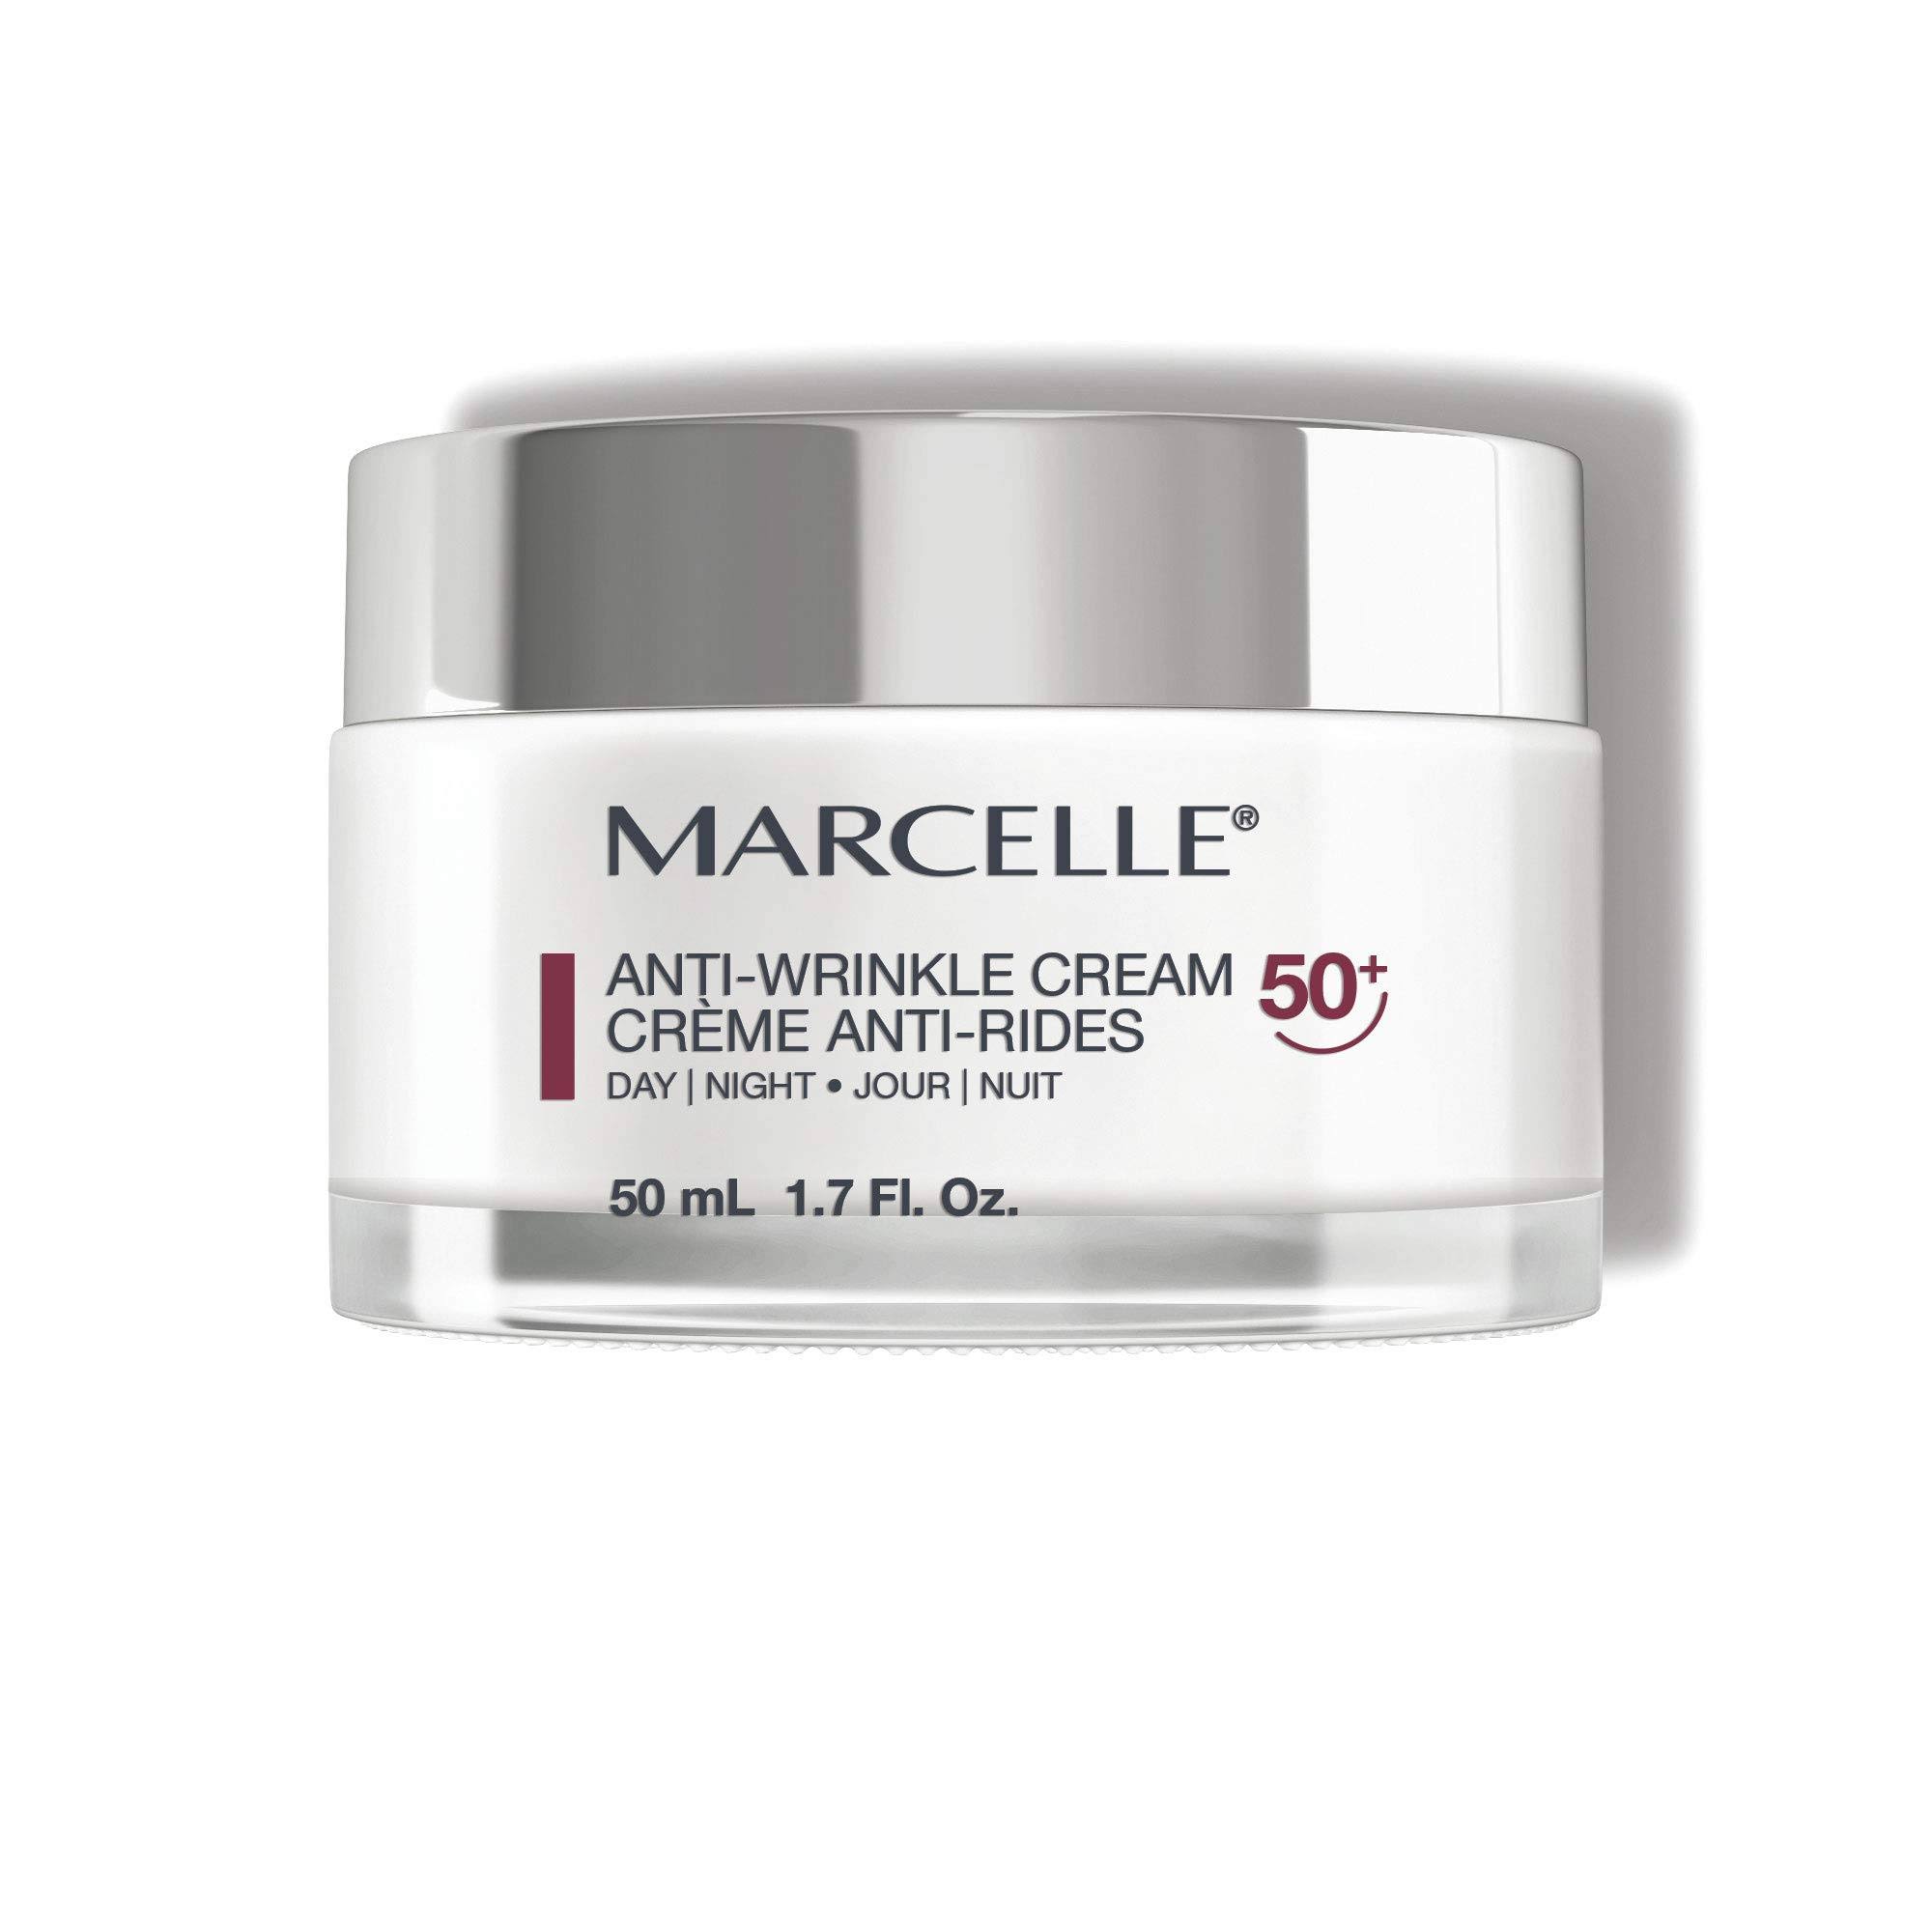 MARCELLE Anti-Wrinkle Cream, Ages 50+, 1.7 ounces